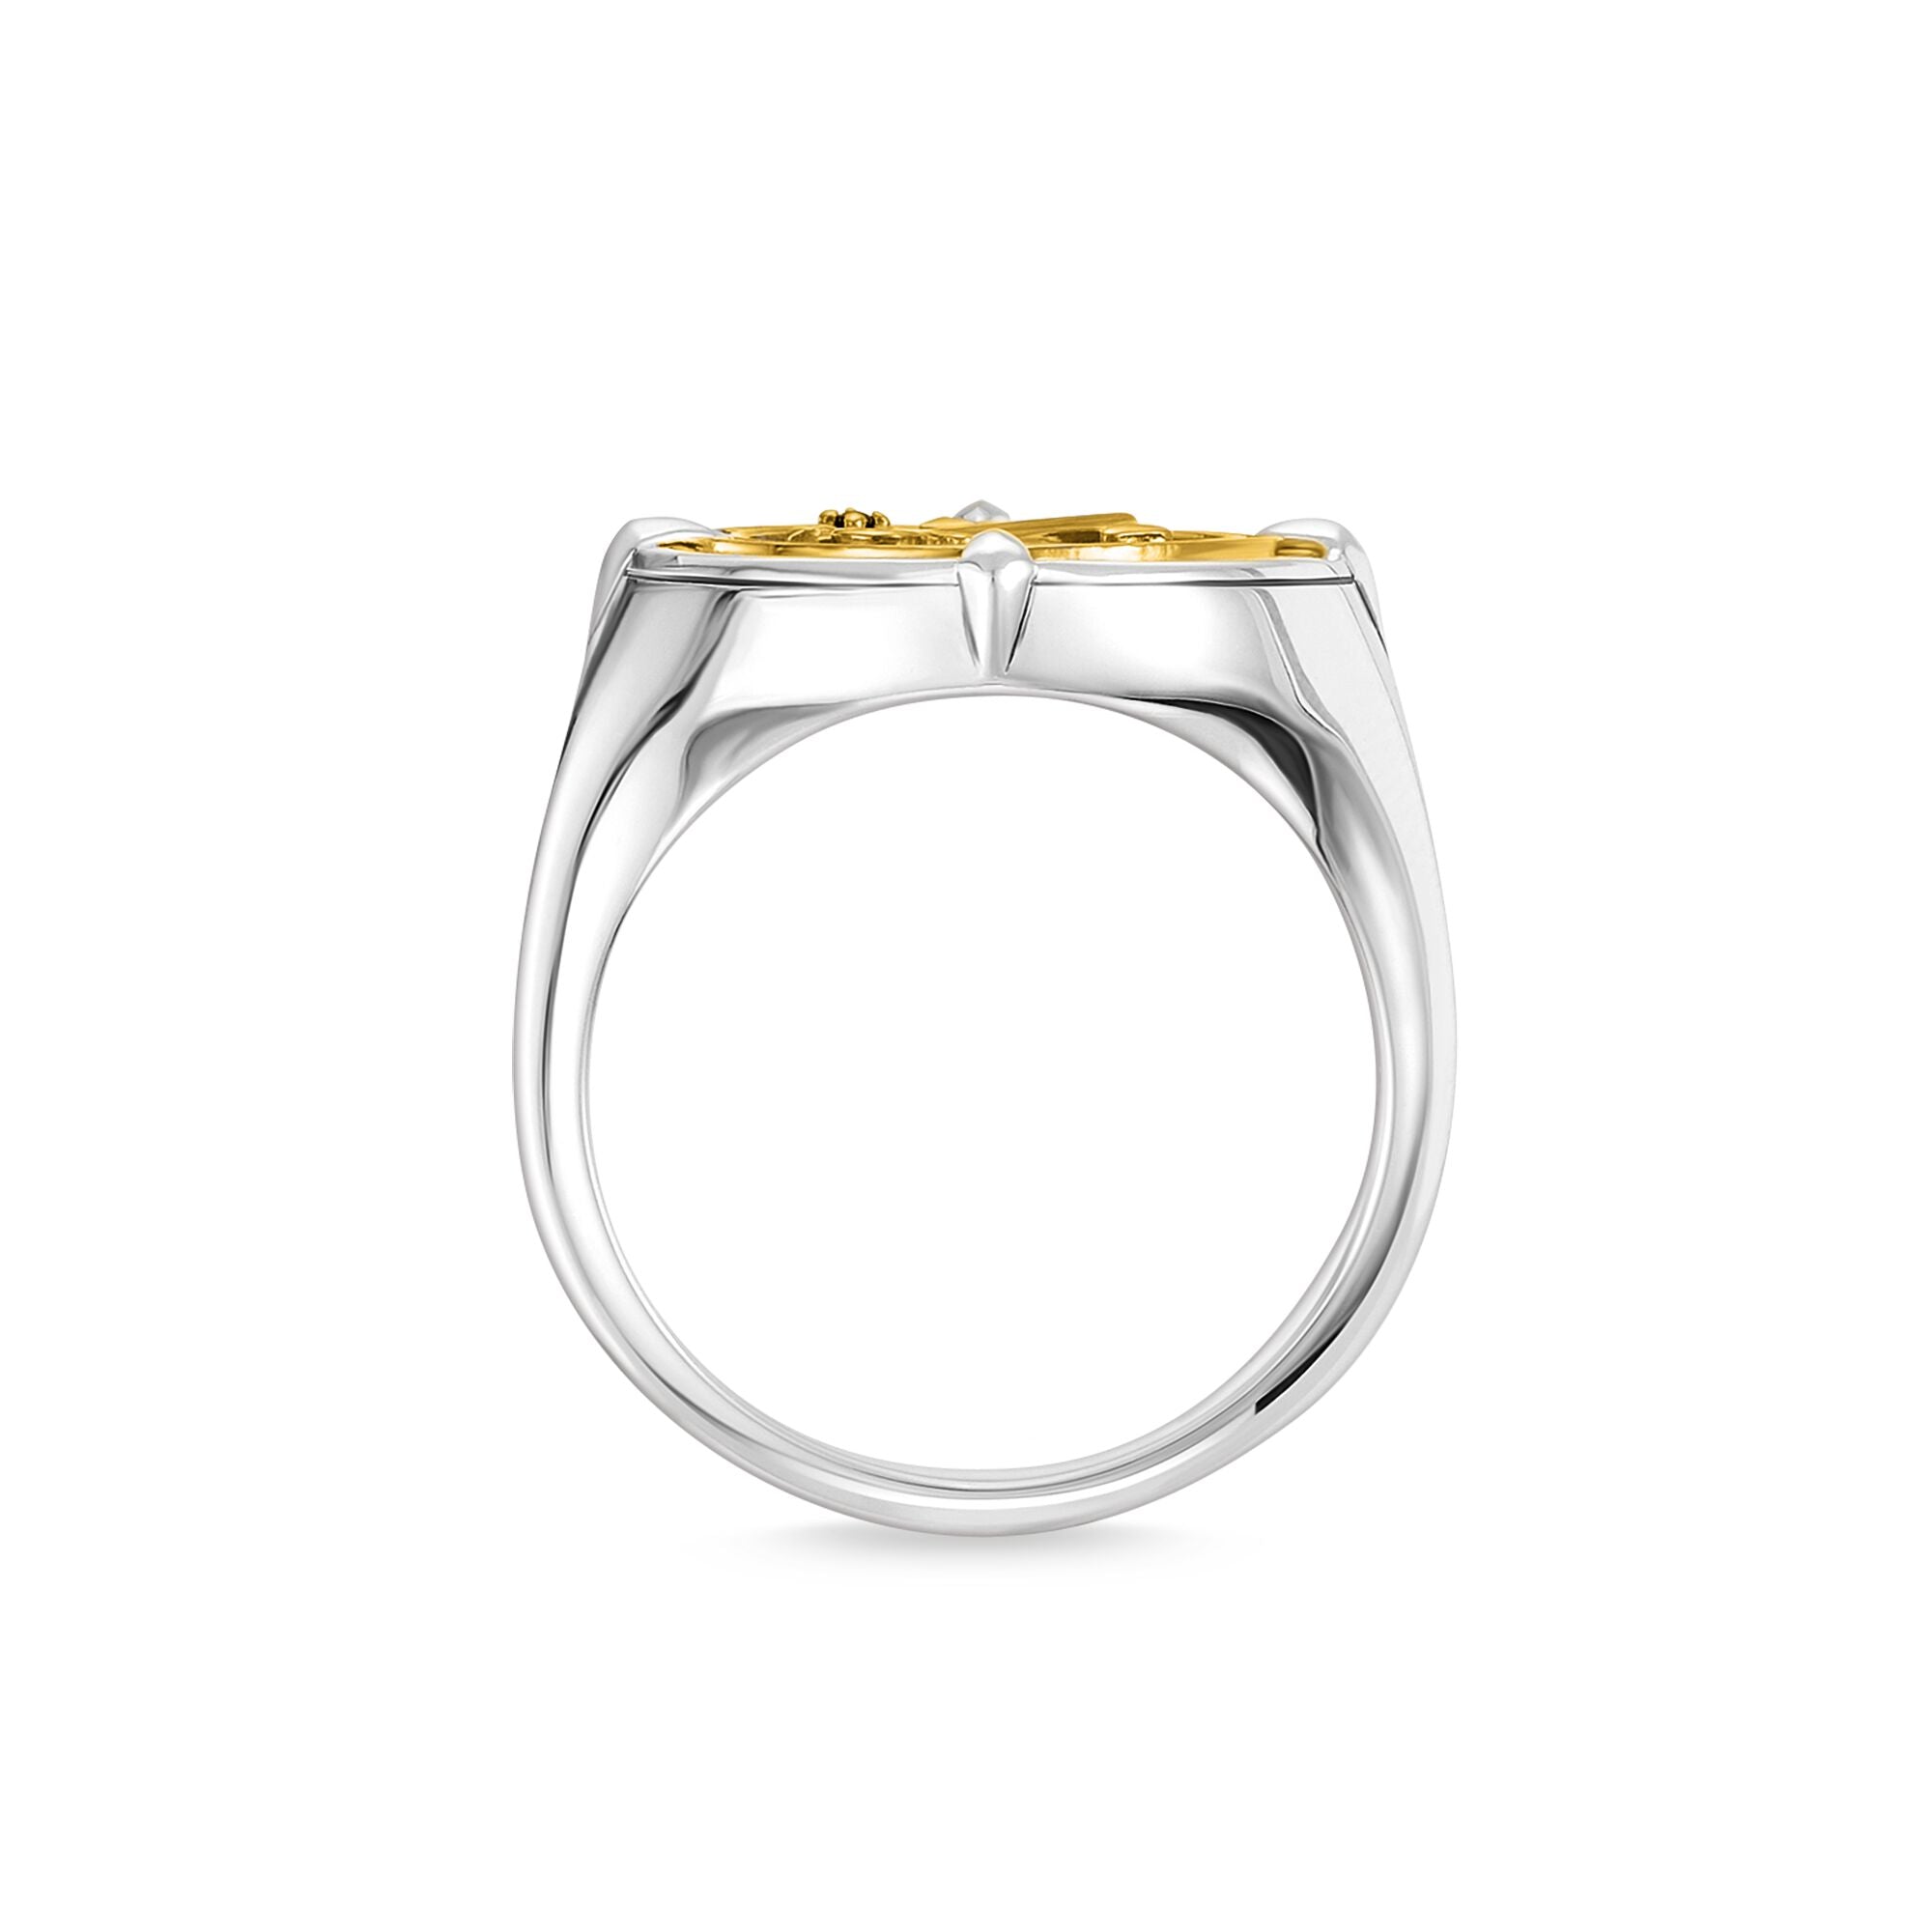 Thomas Sabo 18K Yellow Gold Plated 925 Sterling Blackened Silver Ring from the side